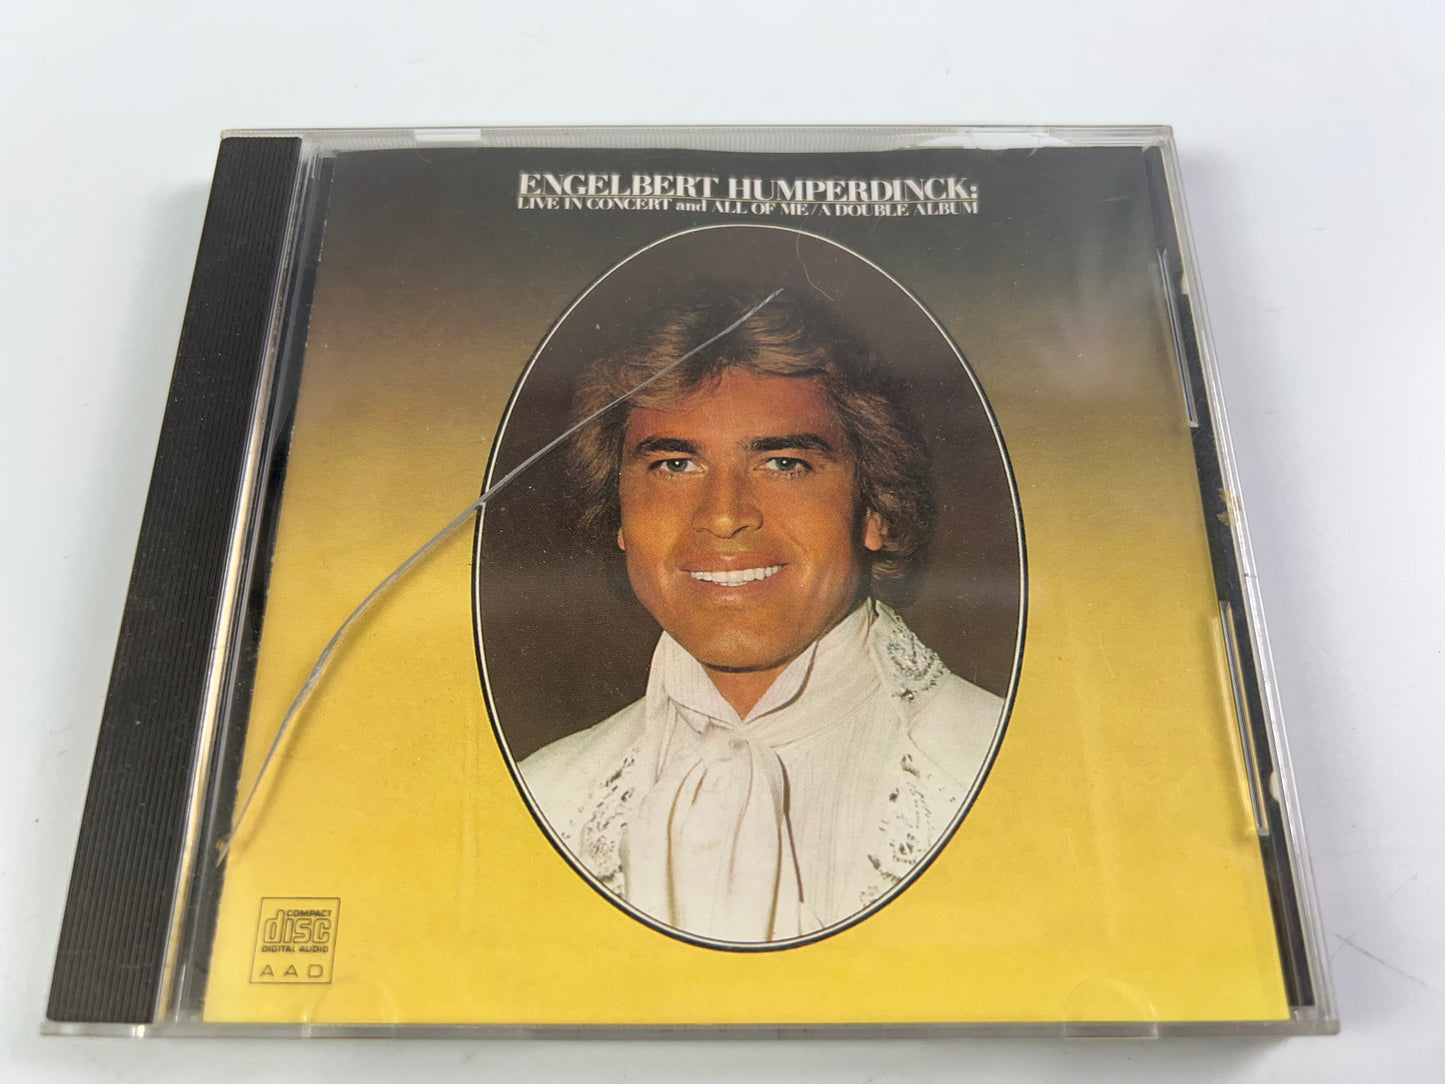 Engelbert Humperdinck : Live in Concert And All Of Me - CD - Epic Records